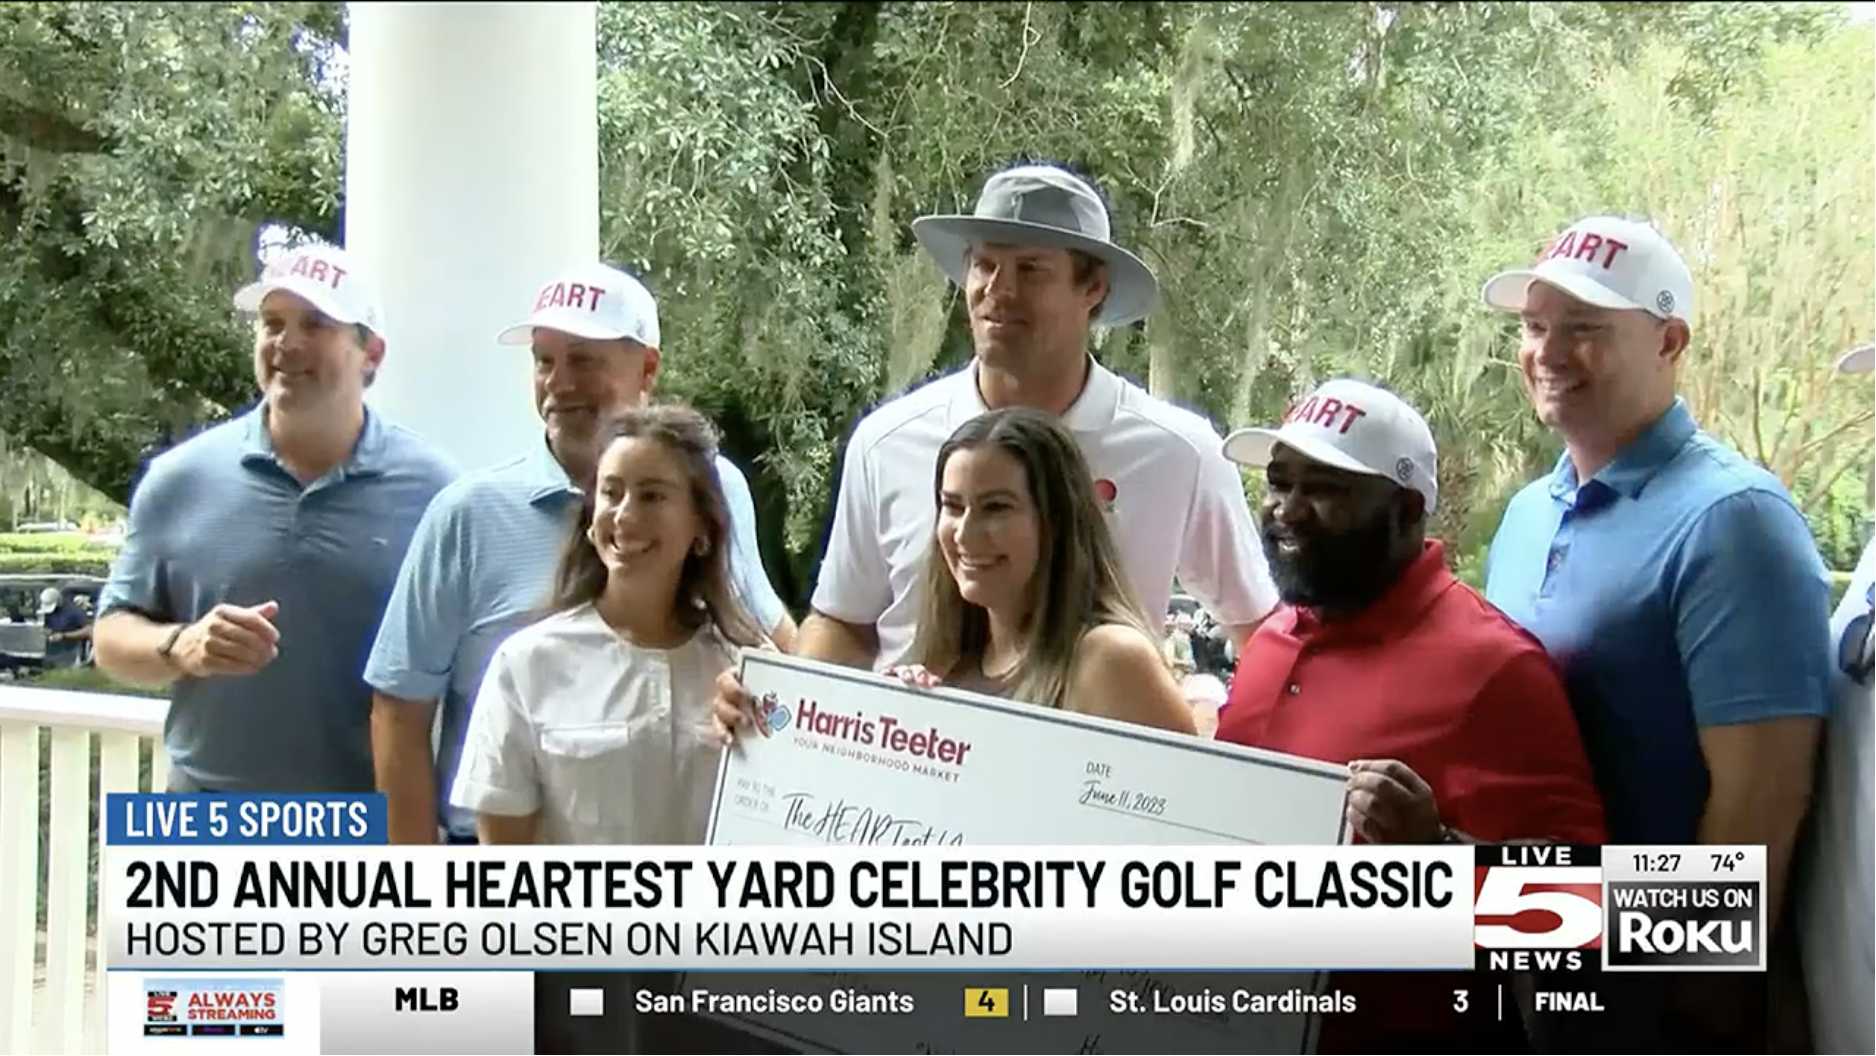 The Heartest Yard Celebrity Golf Classic